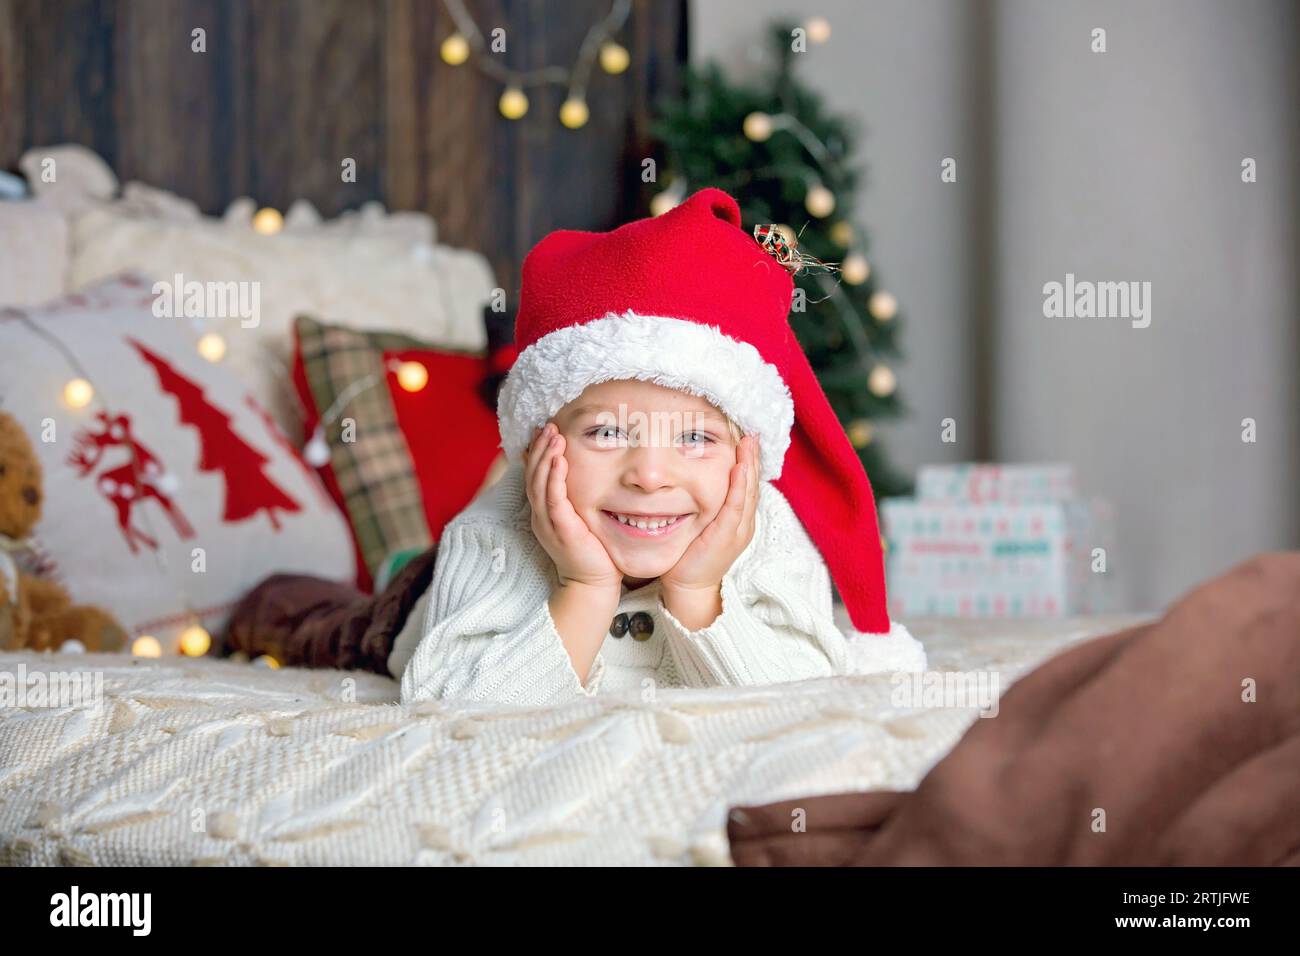 Cute toddler child, boy in a christmas outfut, playing in a wooden cabin on Christmas, derocation around him. Childopening presents Stock Photo